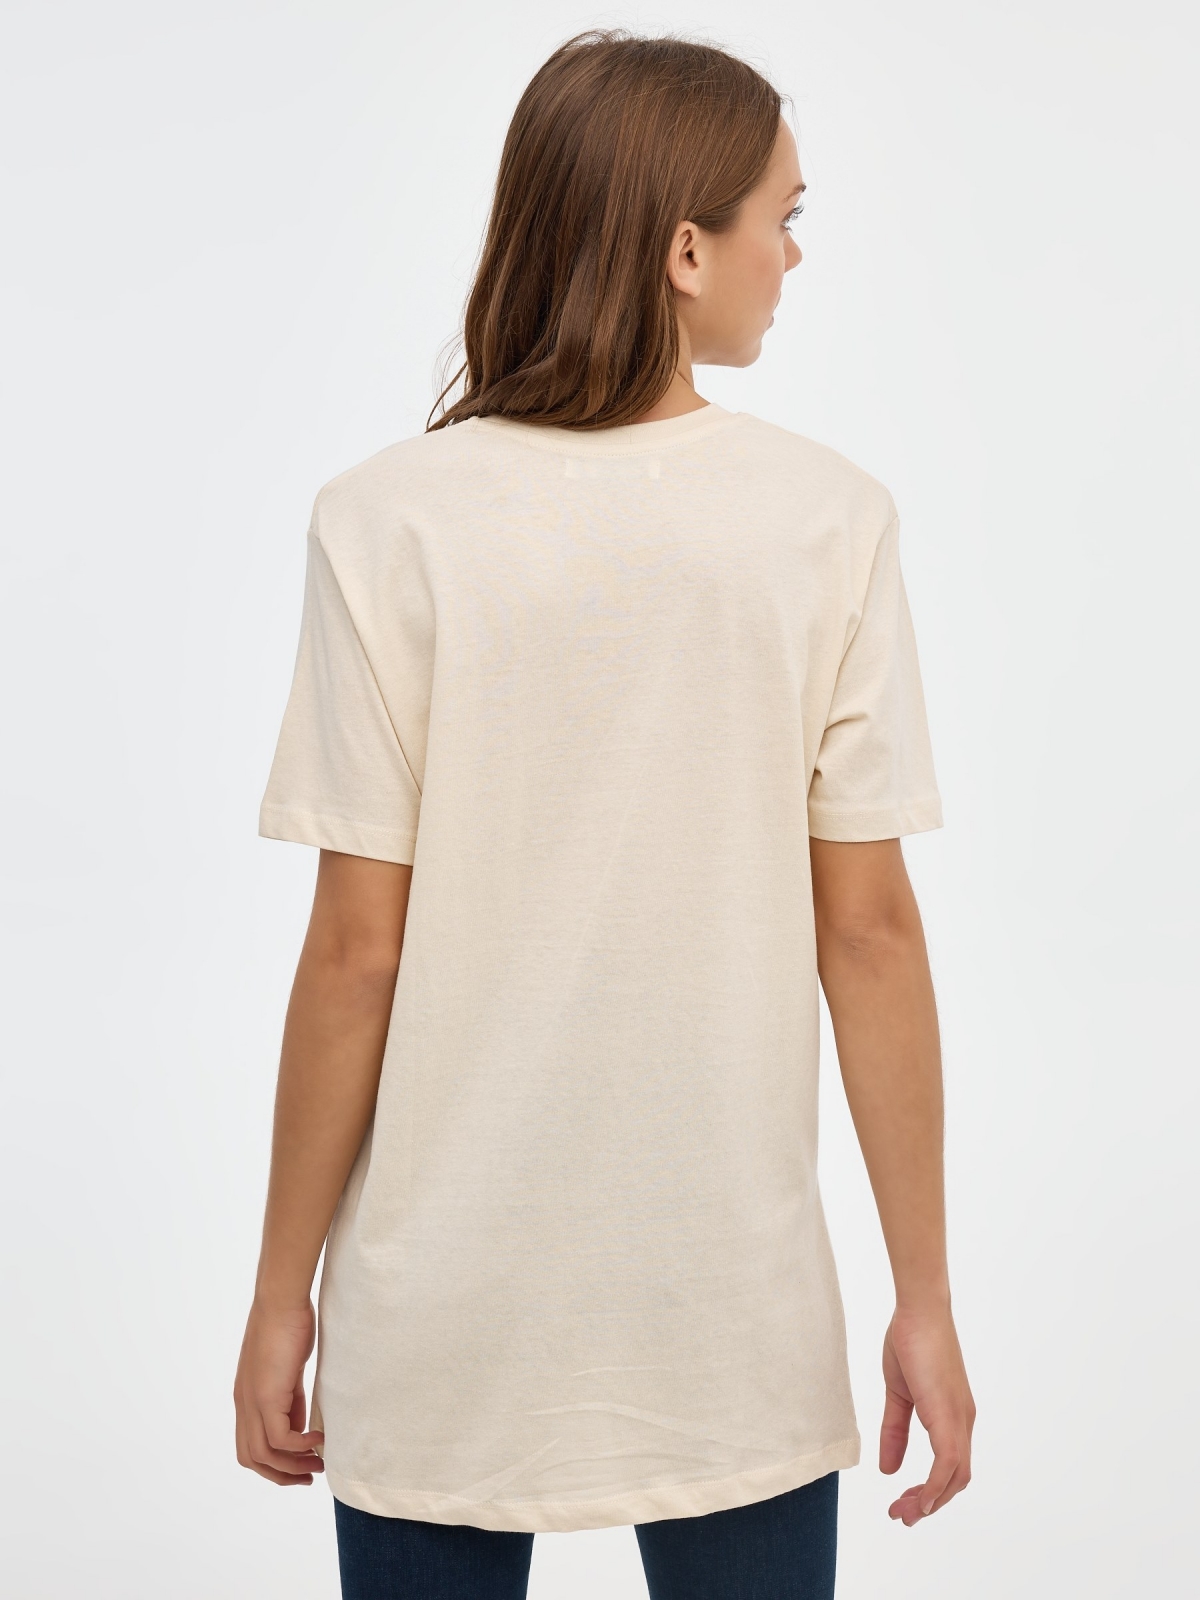 Balancing T-shirt sand middle back view